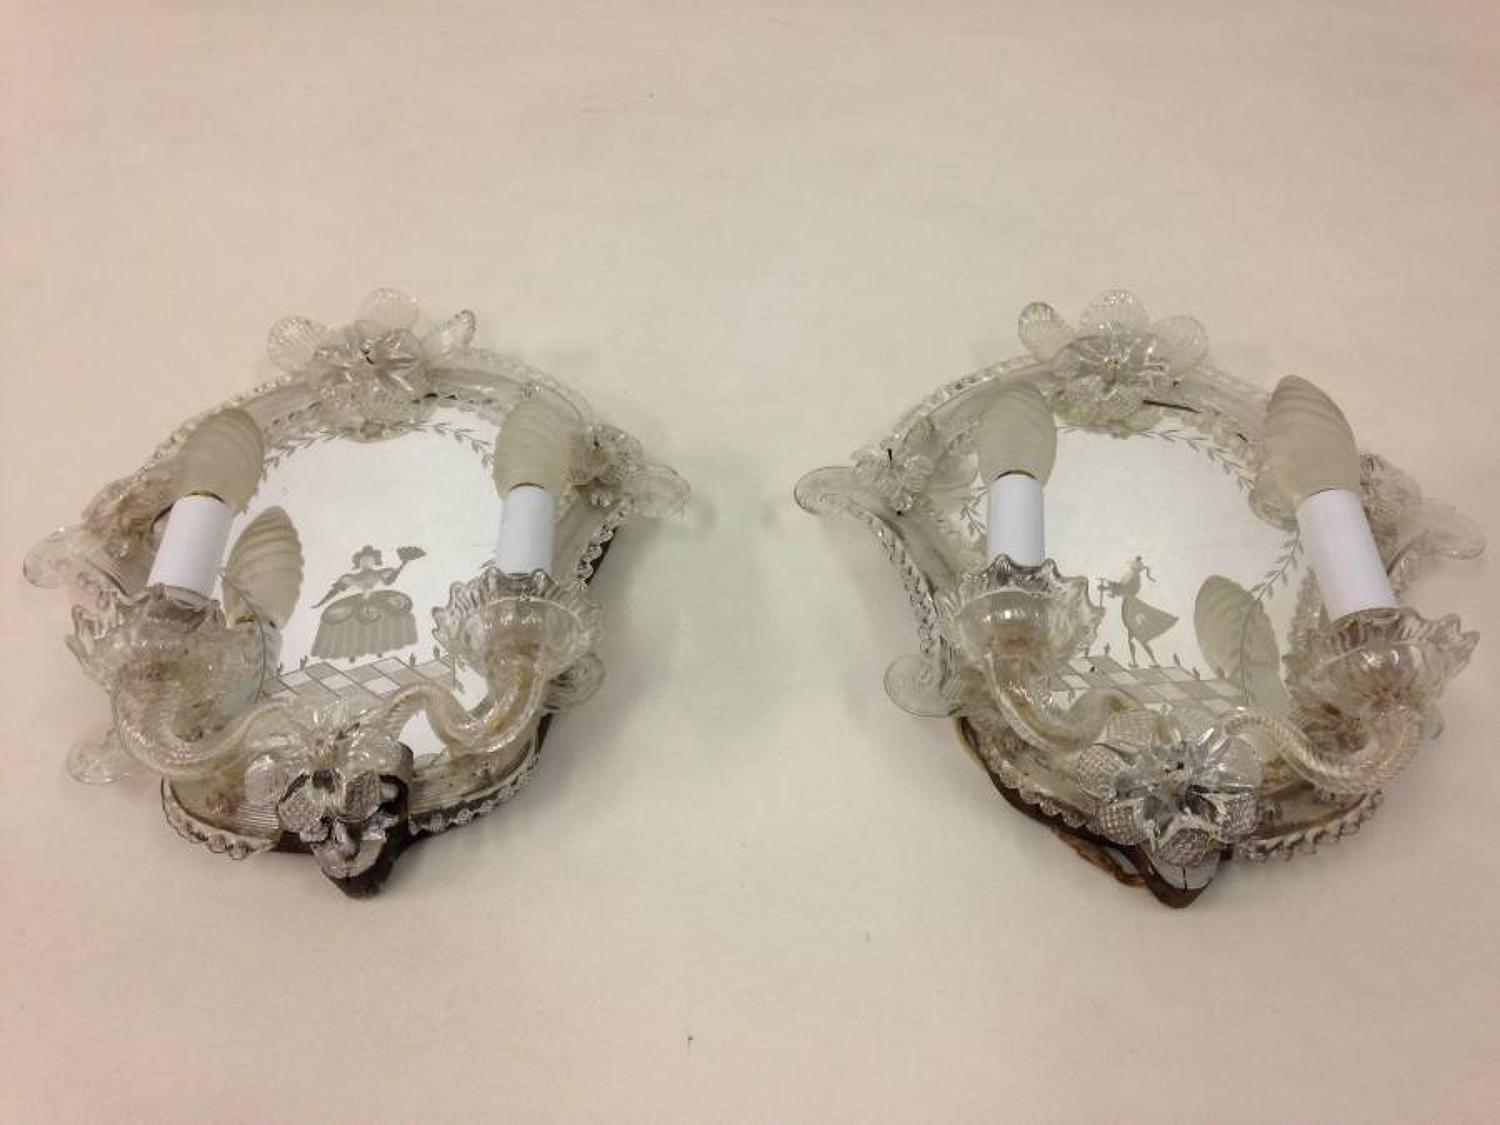 A pair of Venetian mirrored wall sconces